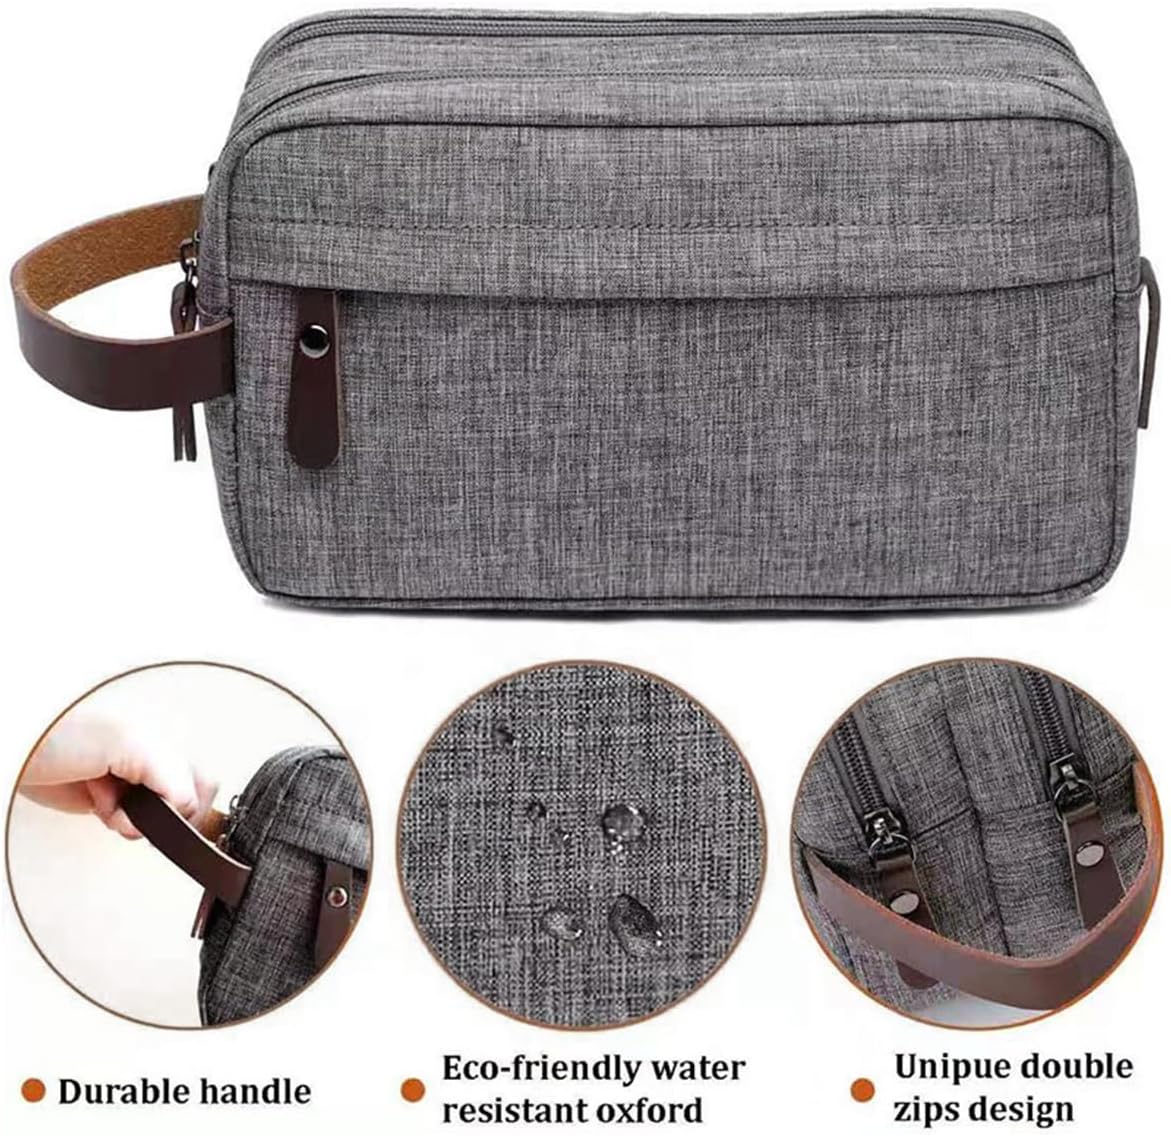 ECVV Toiletry Bag for Men, Travel Toiletry Organizer Case, Water-resistant Dopp Kit Shaving Bag for Toiletries Accessories and Shaving Supplies, Gray